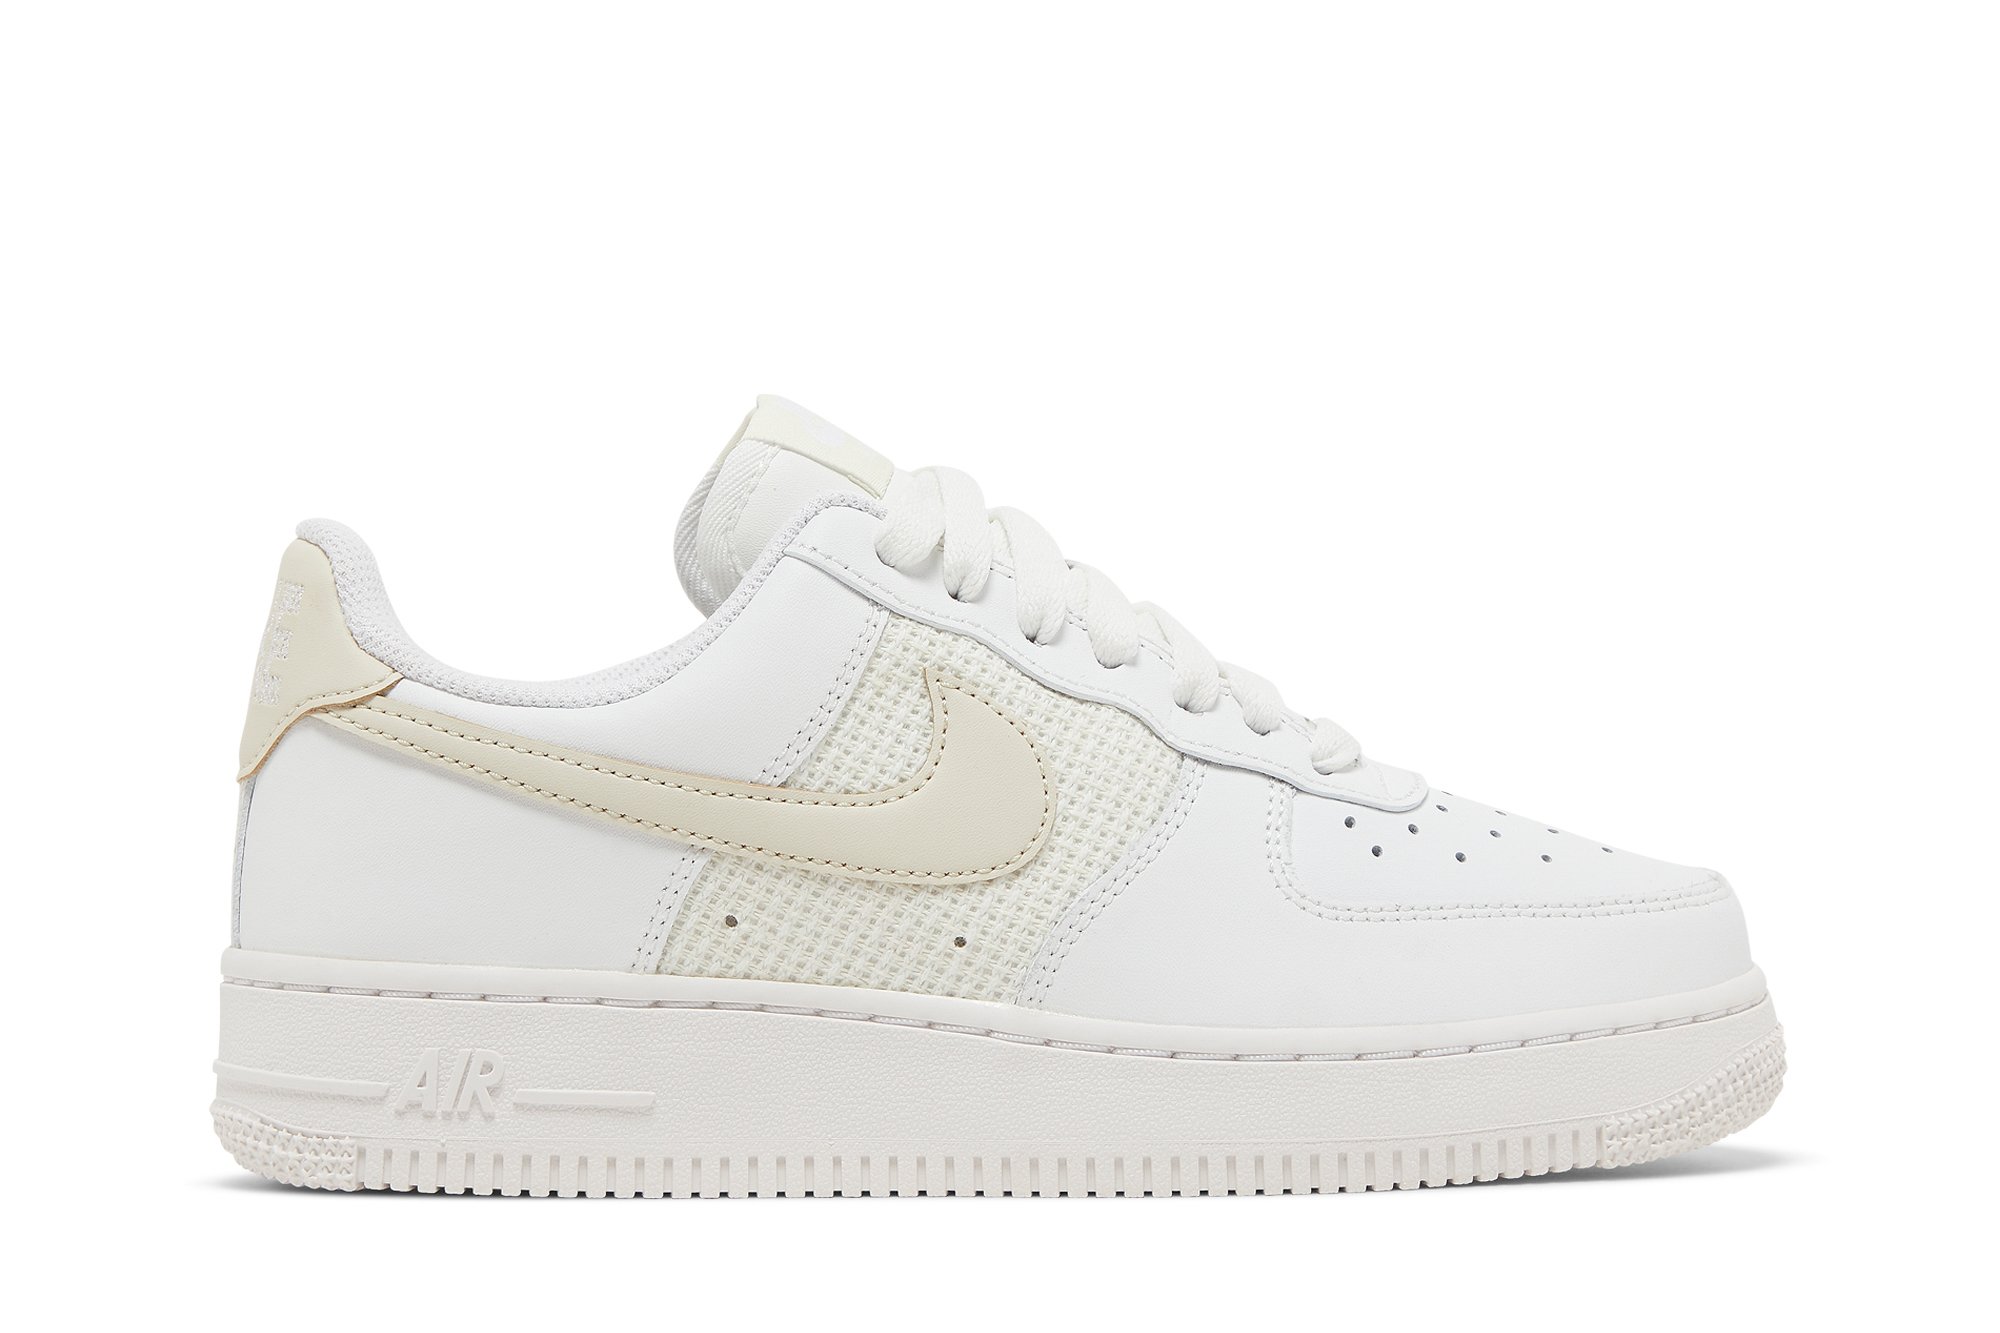 Wmns Air Force 1 '07 ESS 'Cross Stitch - White Fossil'